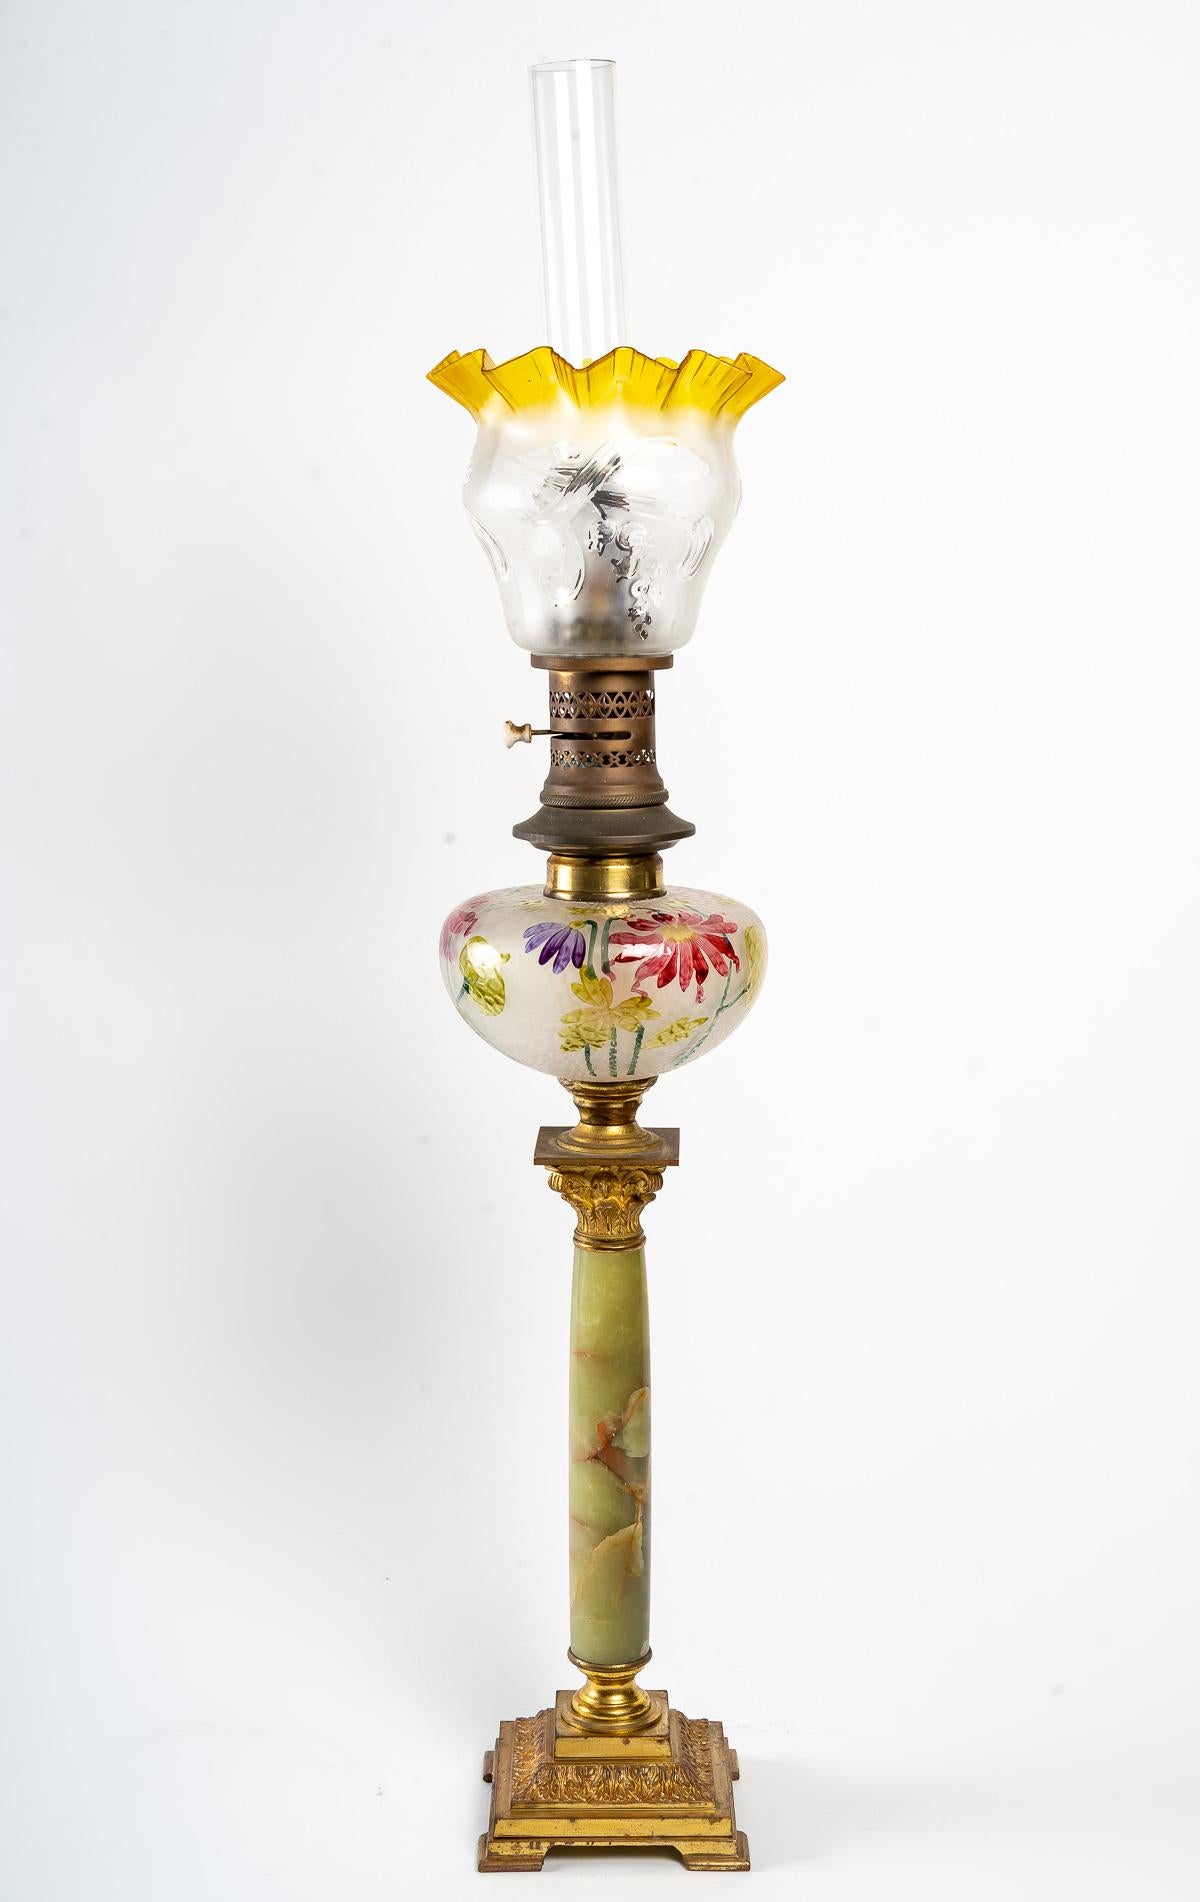 Oil lamp, Napoleon III period

Napoleon III period oil lamp in painted glass, onyx and gilt bronze from the 19th century.



Dimensions: H: 88cm, D: 17cm.